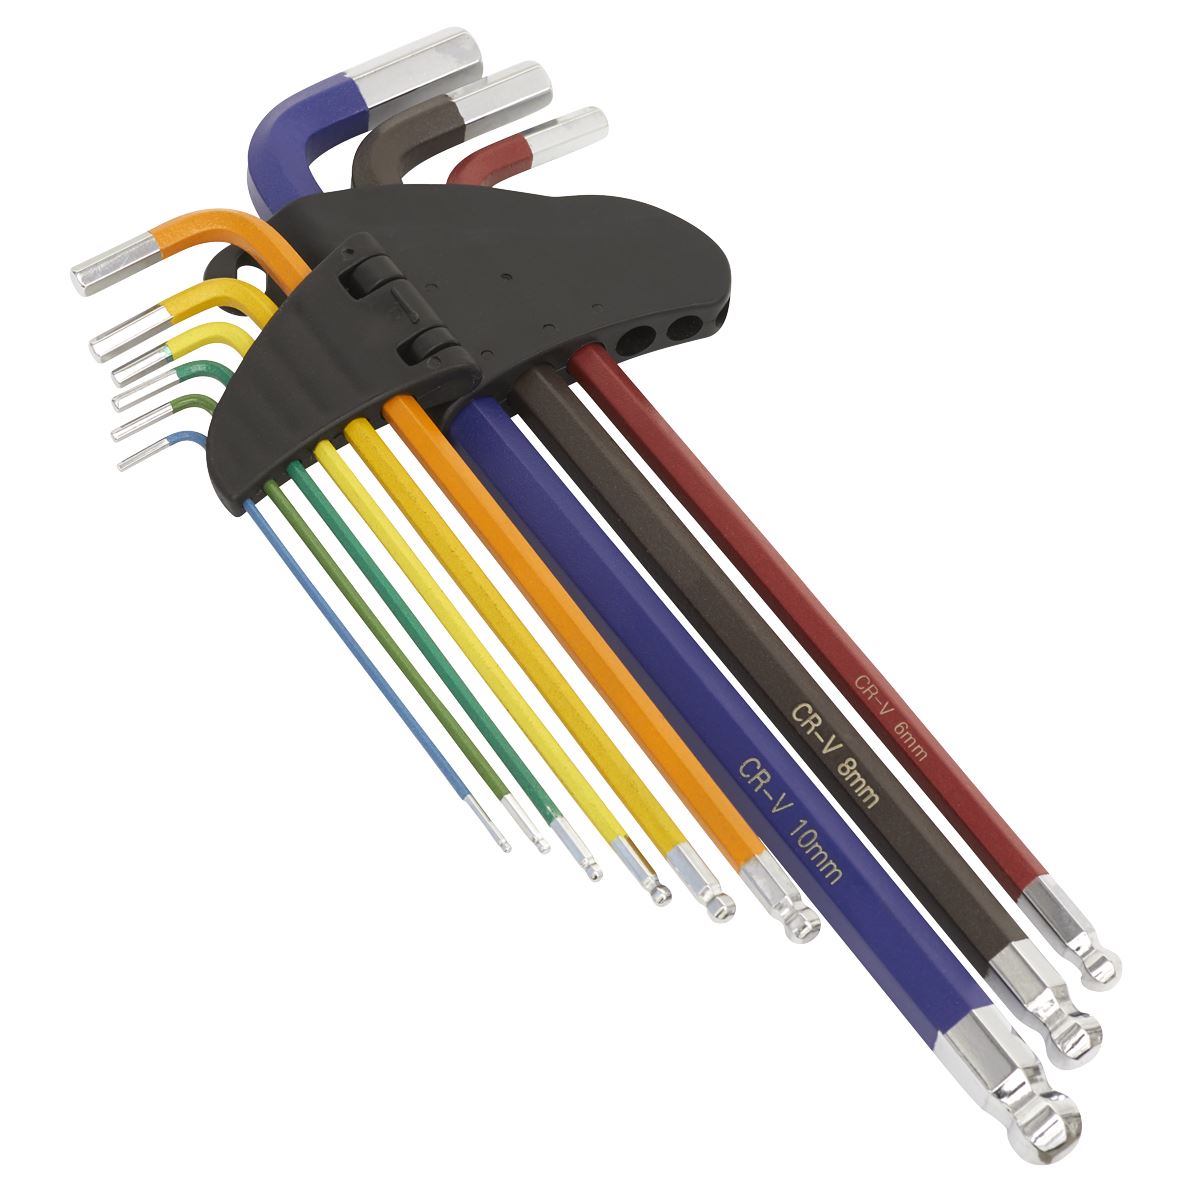 Sealey Premier 9 Piece Colour Coded Extra Long Ball End Hex Key Set 1.5-10mm Case